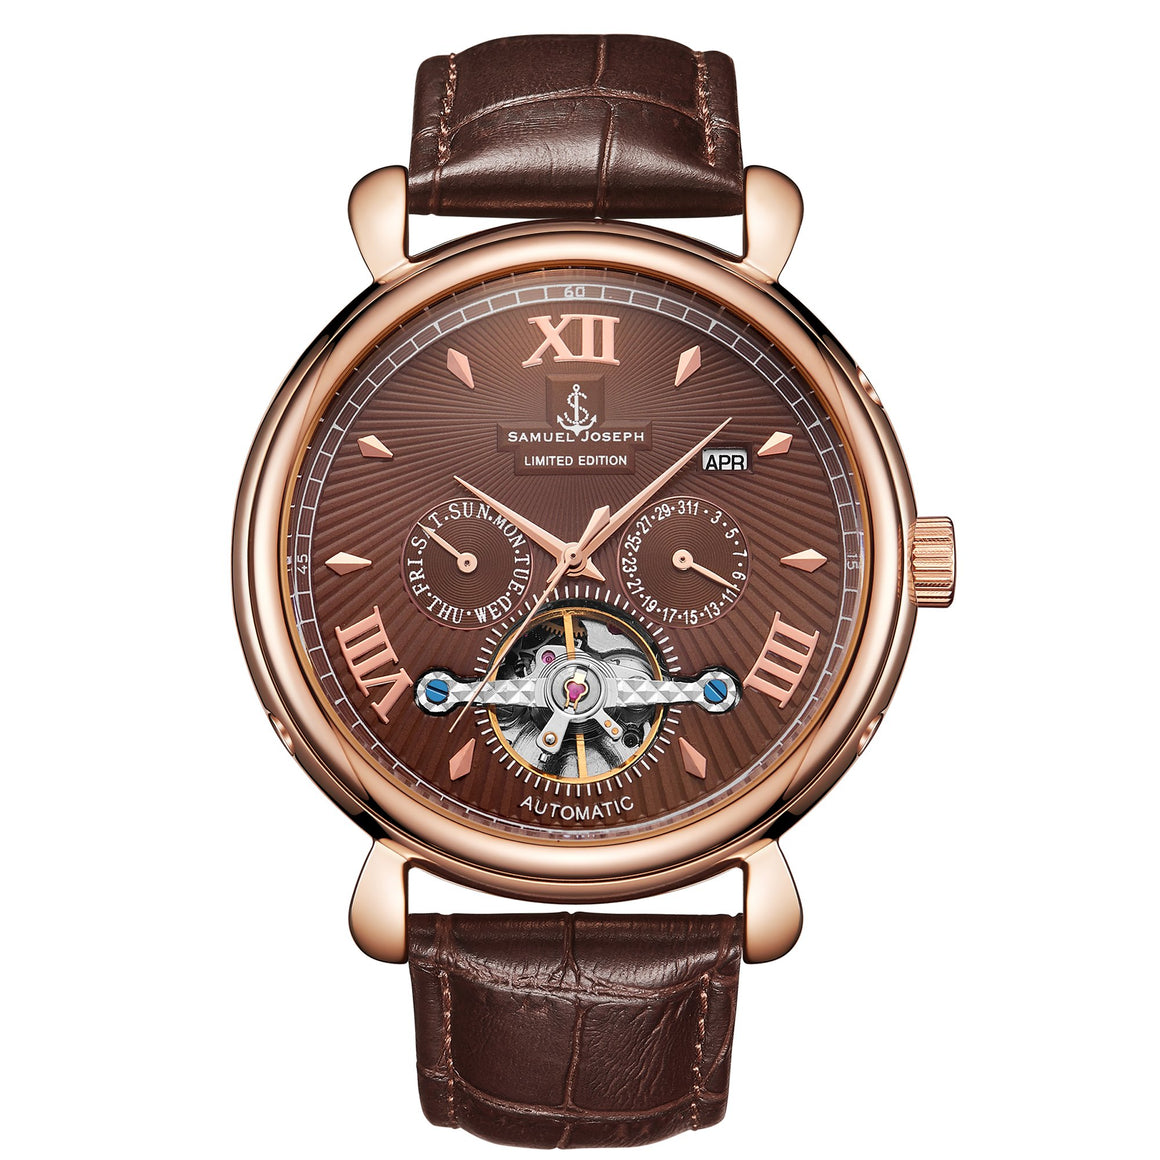 Limited Edition Mocha & Gold Automatic Skeleton Men's Watch